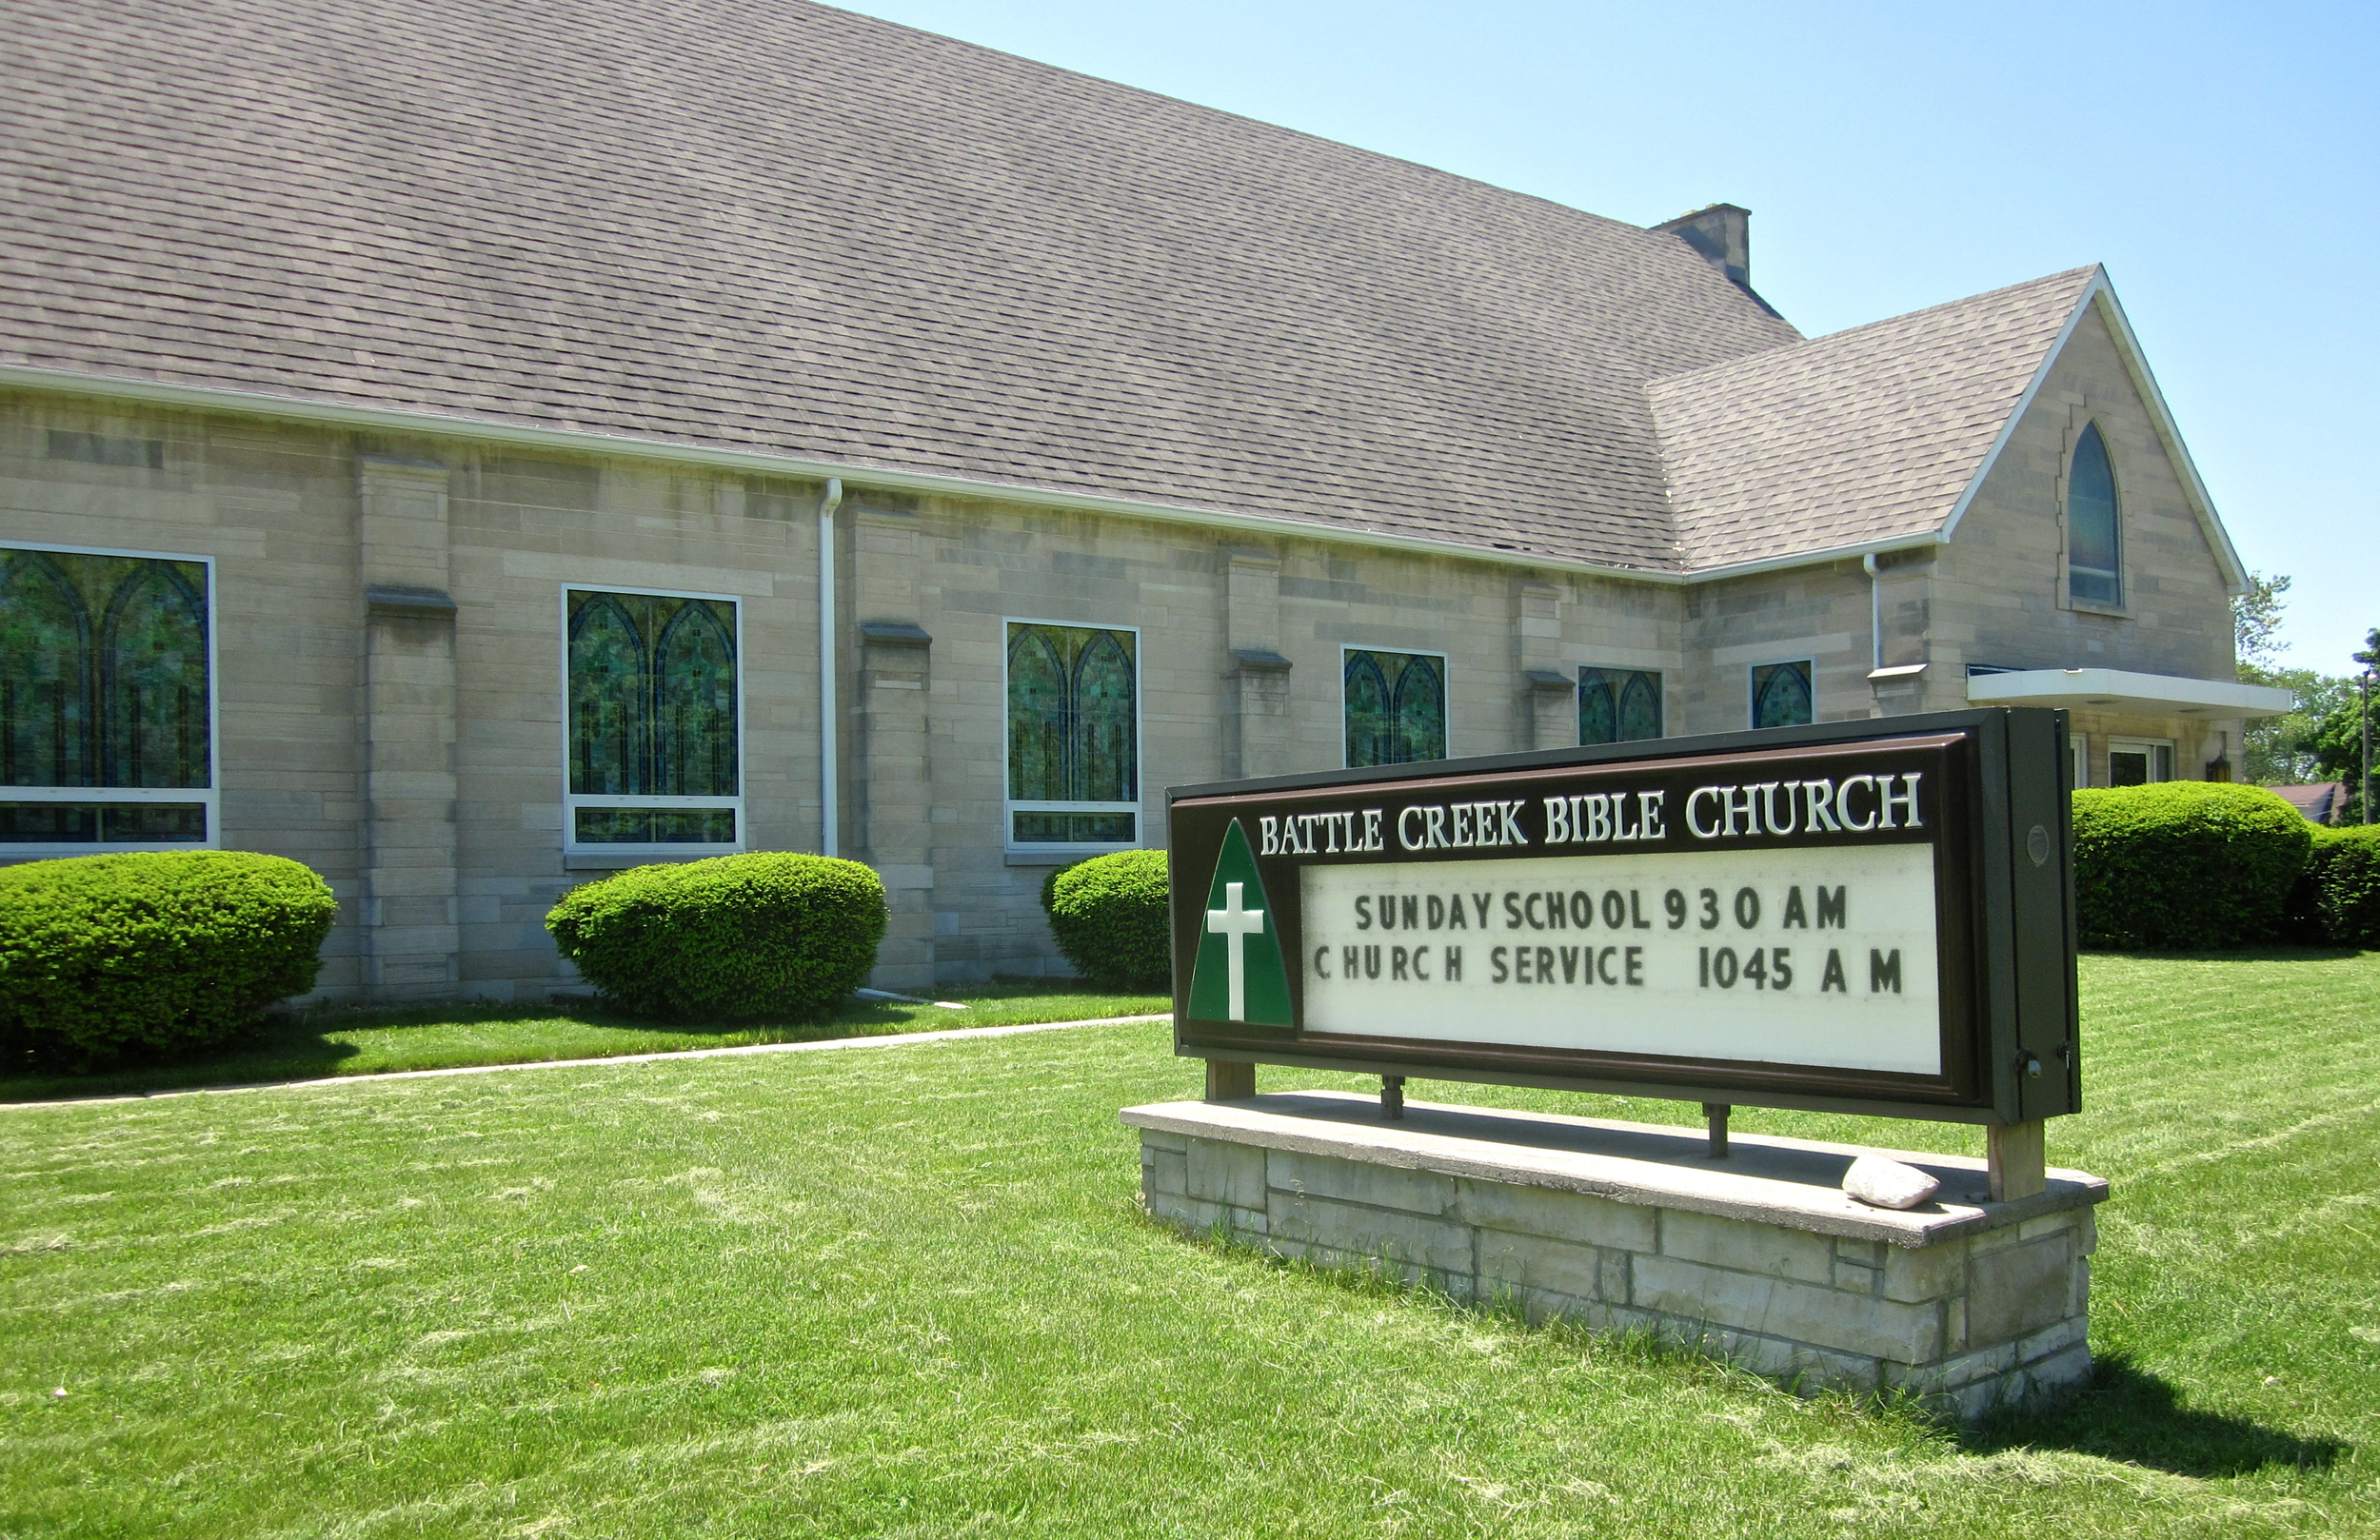  welcome to   Battle Creek Bible Church    Learn More  